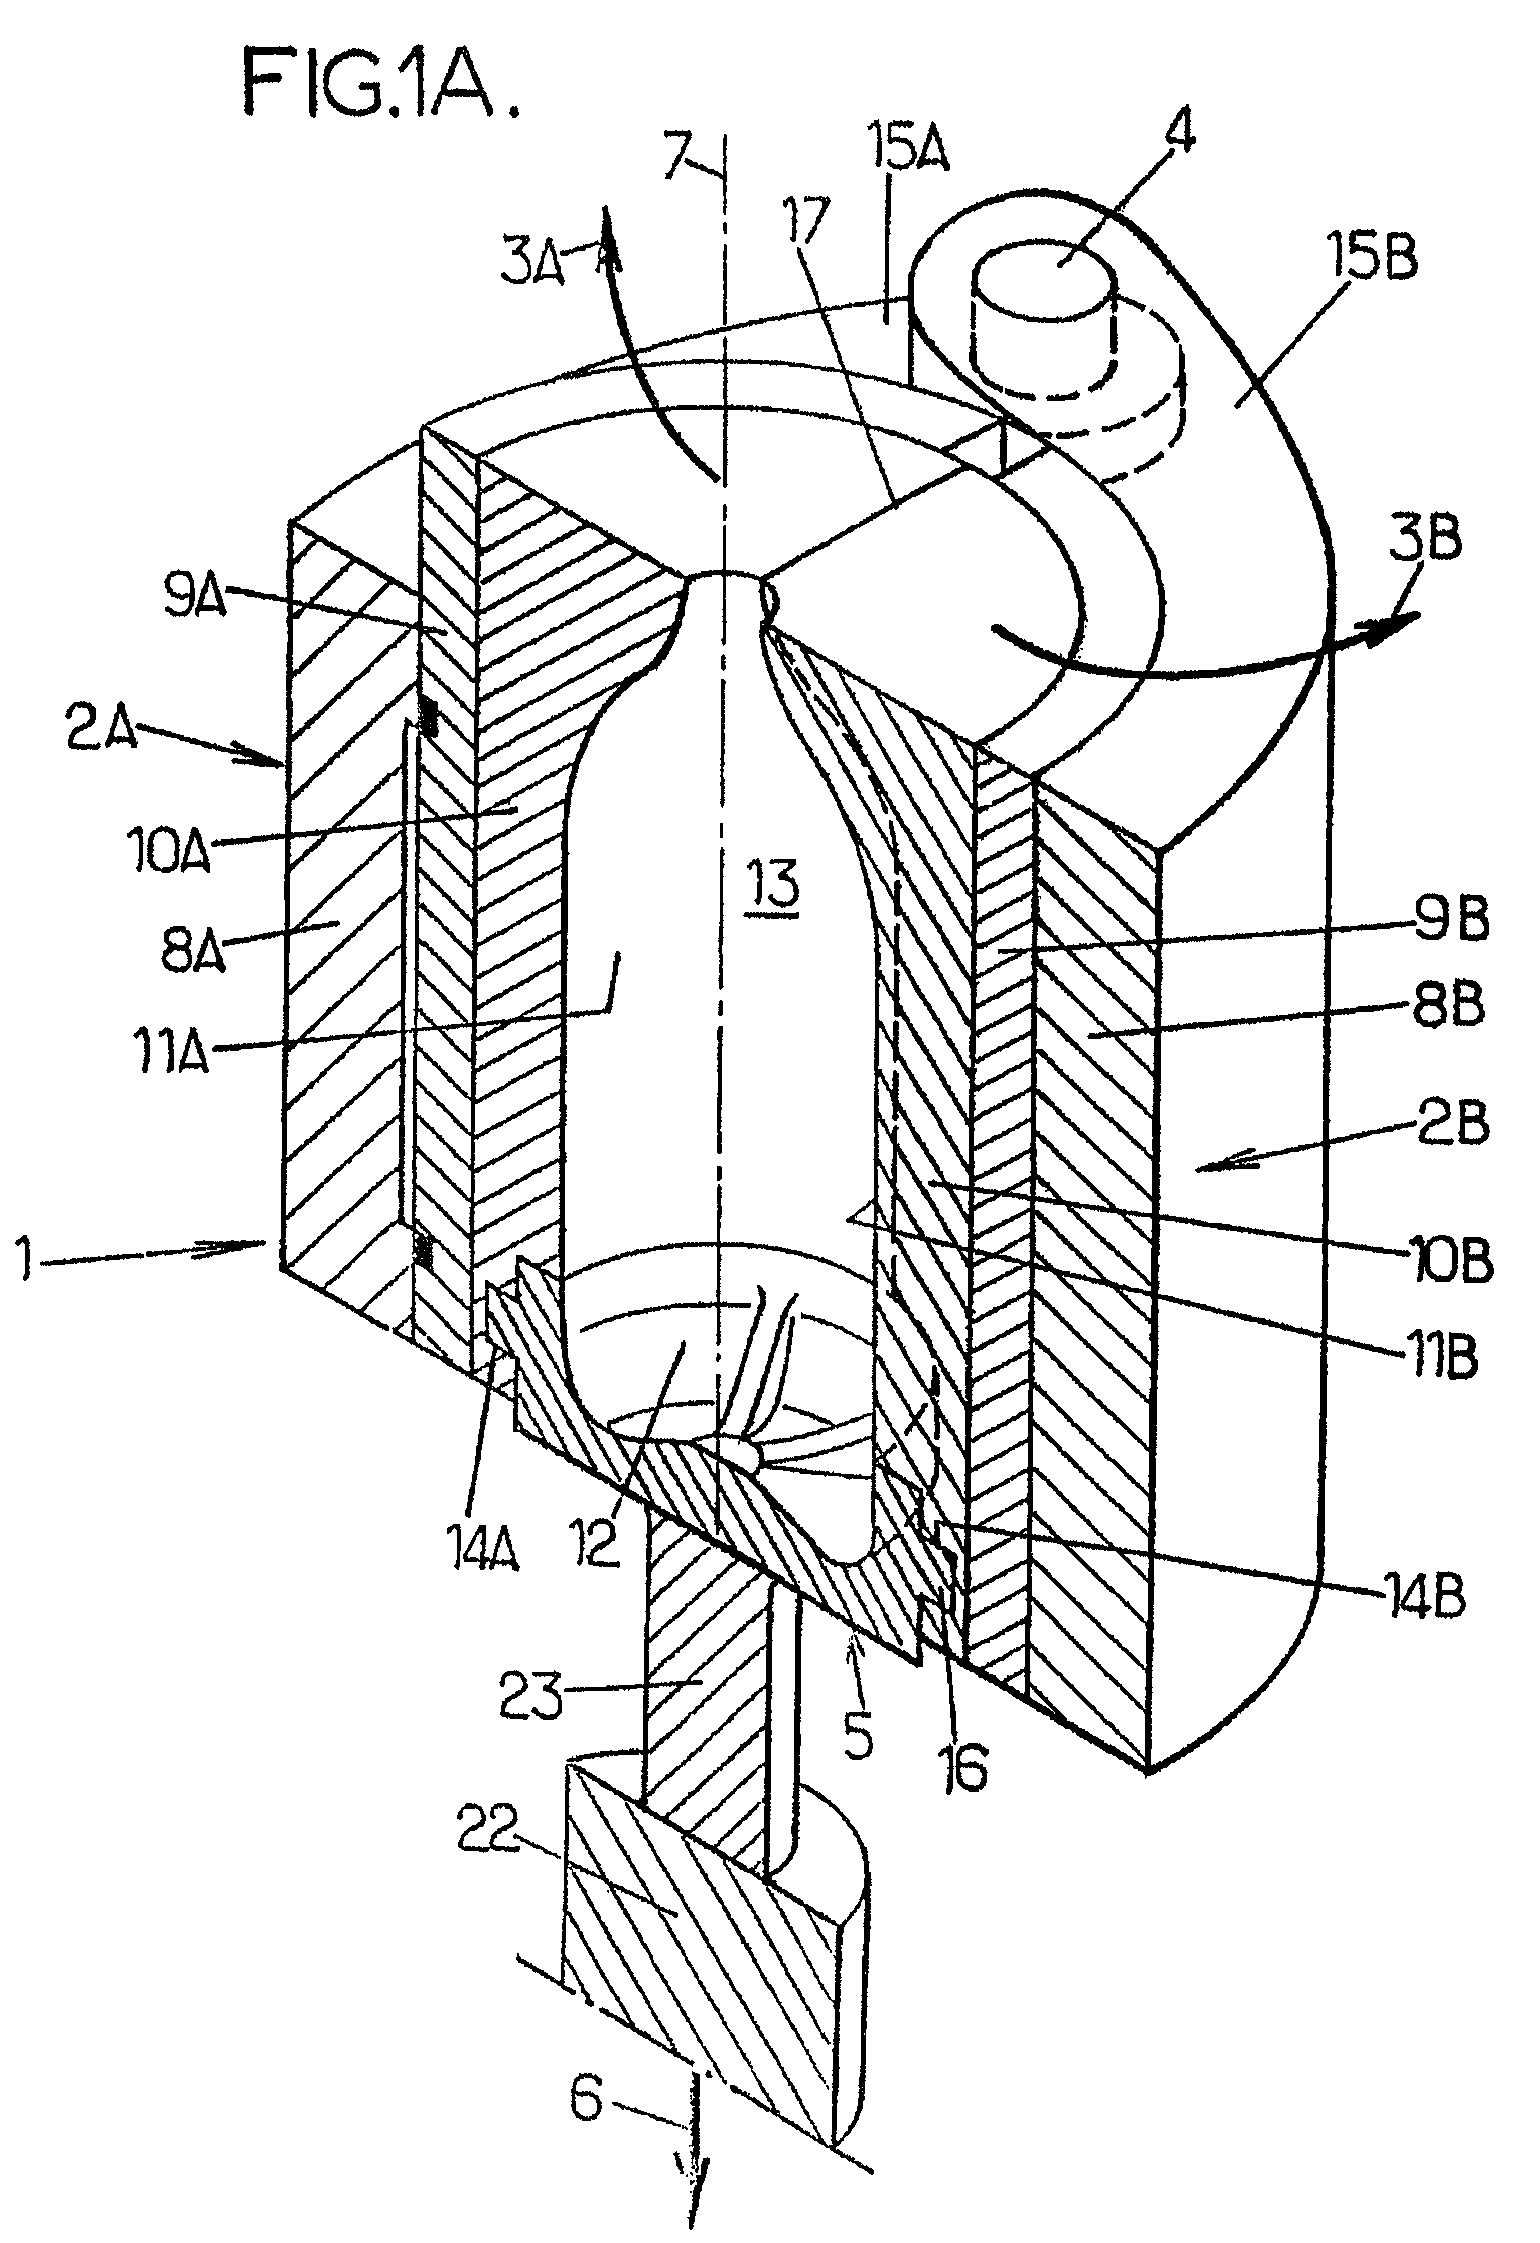 Molding device with height-adjustable base for molding thermoplastic containers of various heights